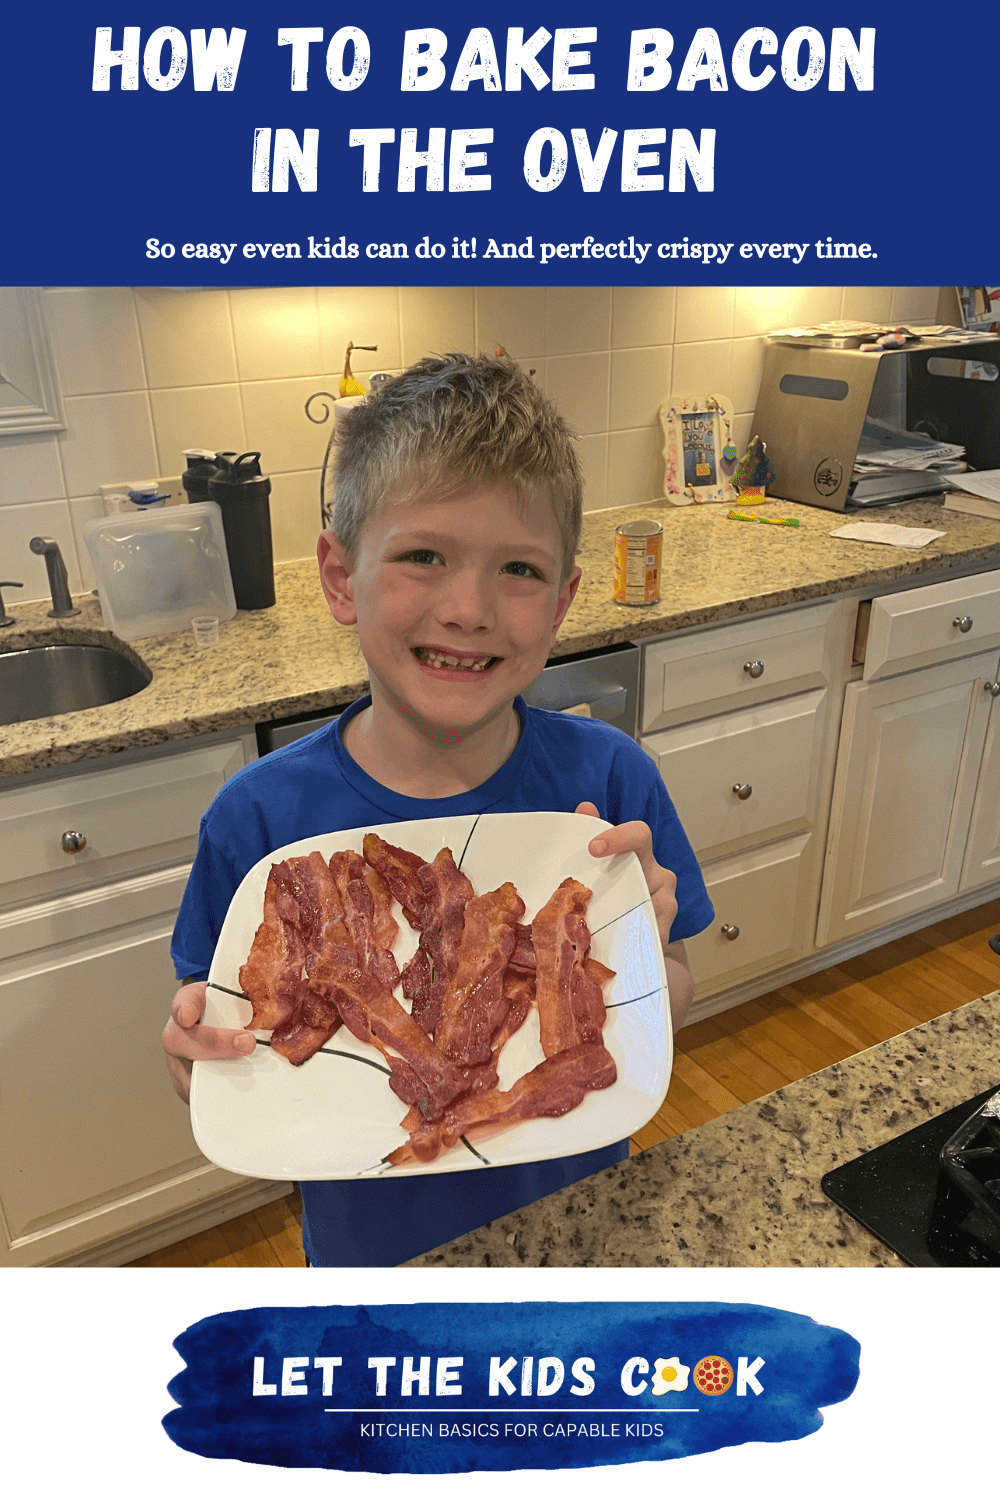 Learn how to bake bacon in the oven. This foolproof method is so easy and you'll get perfectly crisp bacon every time.